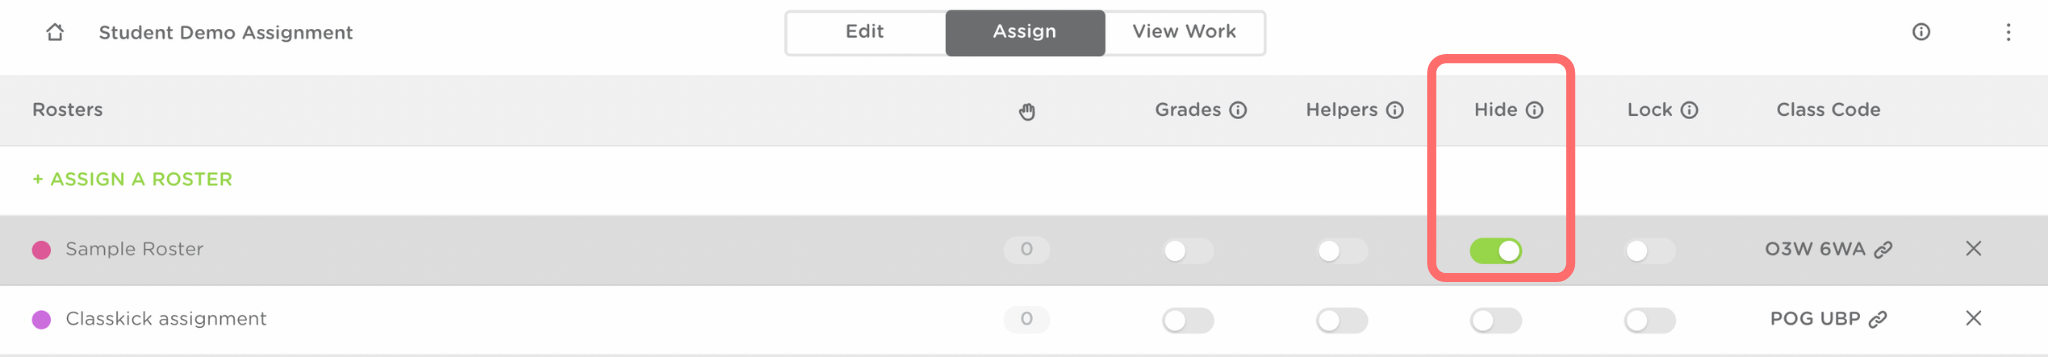 The assign tab under assignments. The Hide option is toggled on for the sample roster and is outlined in red.